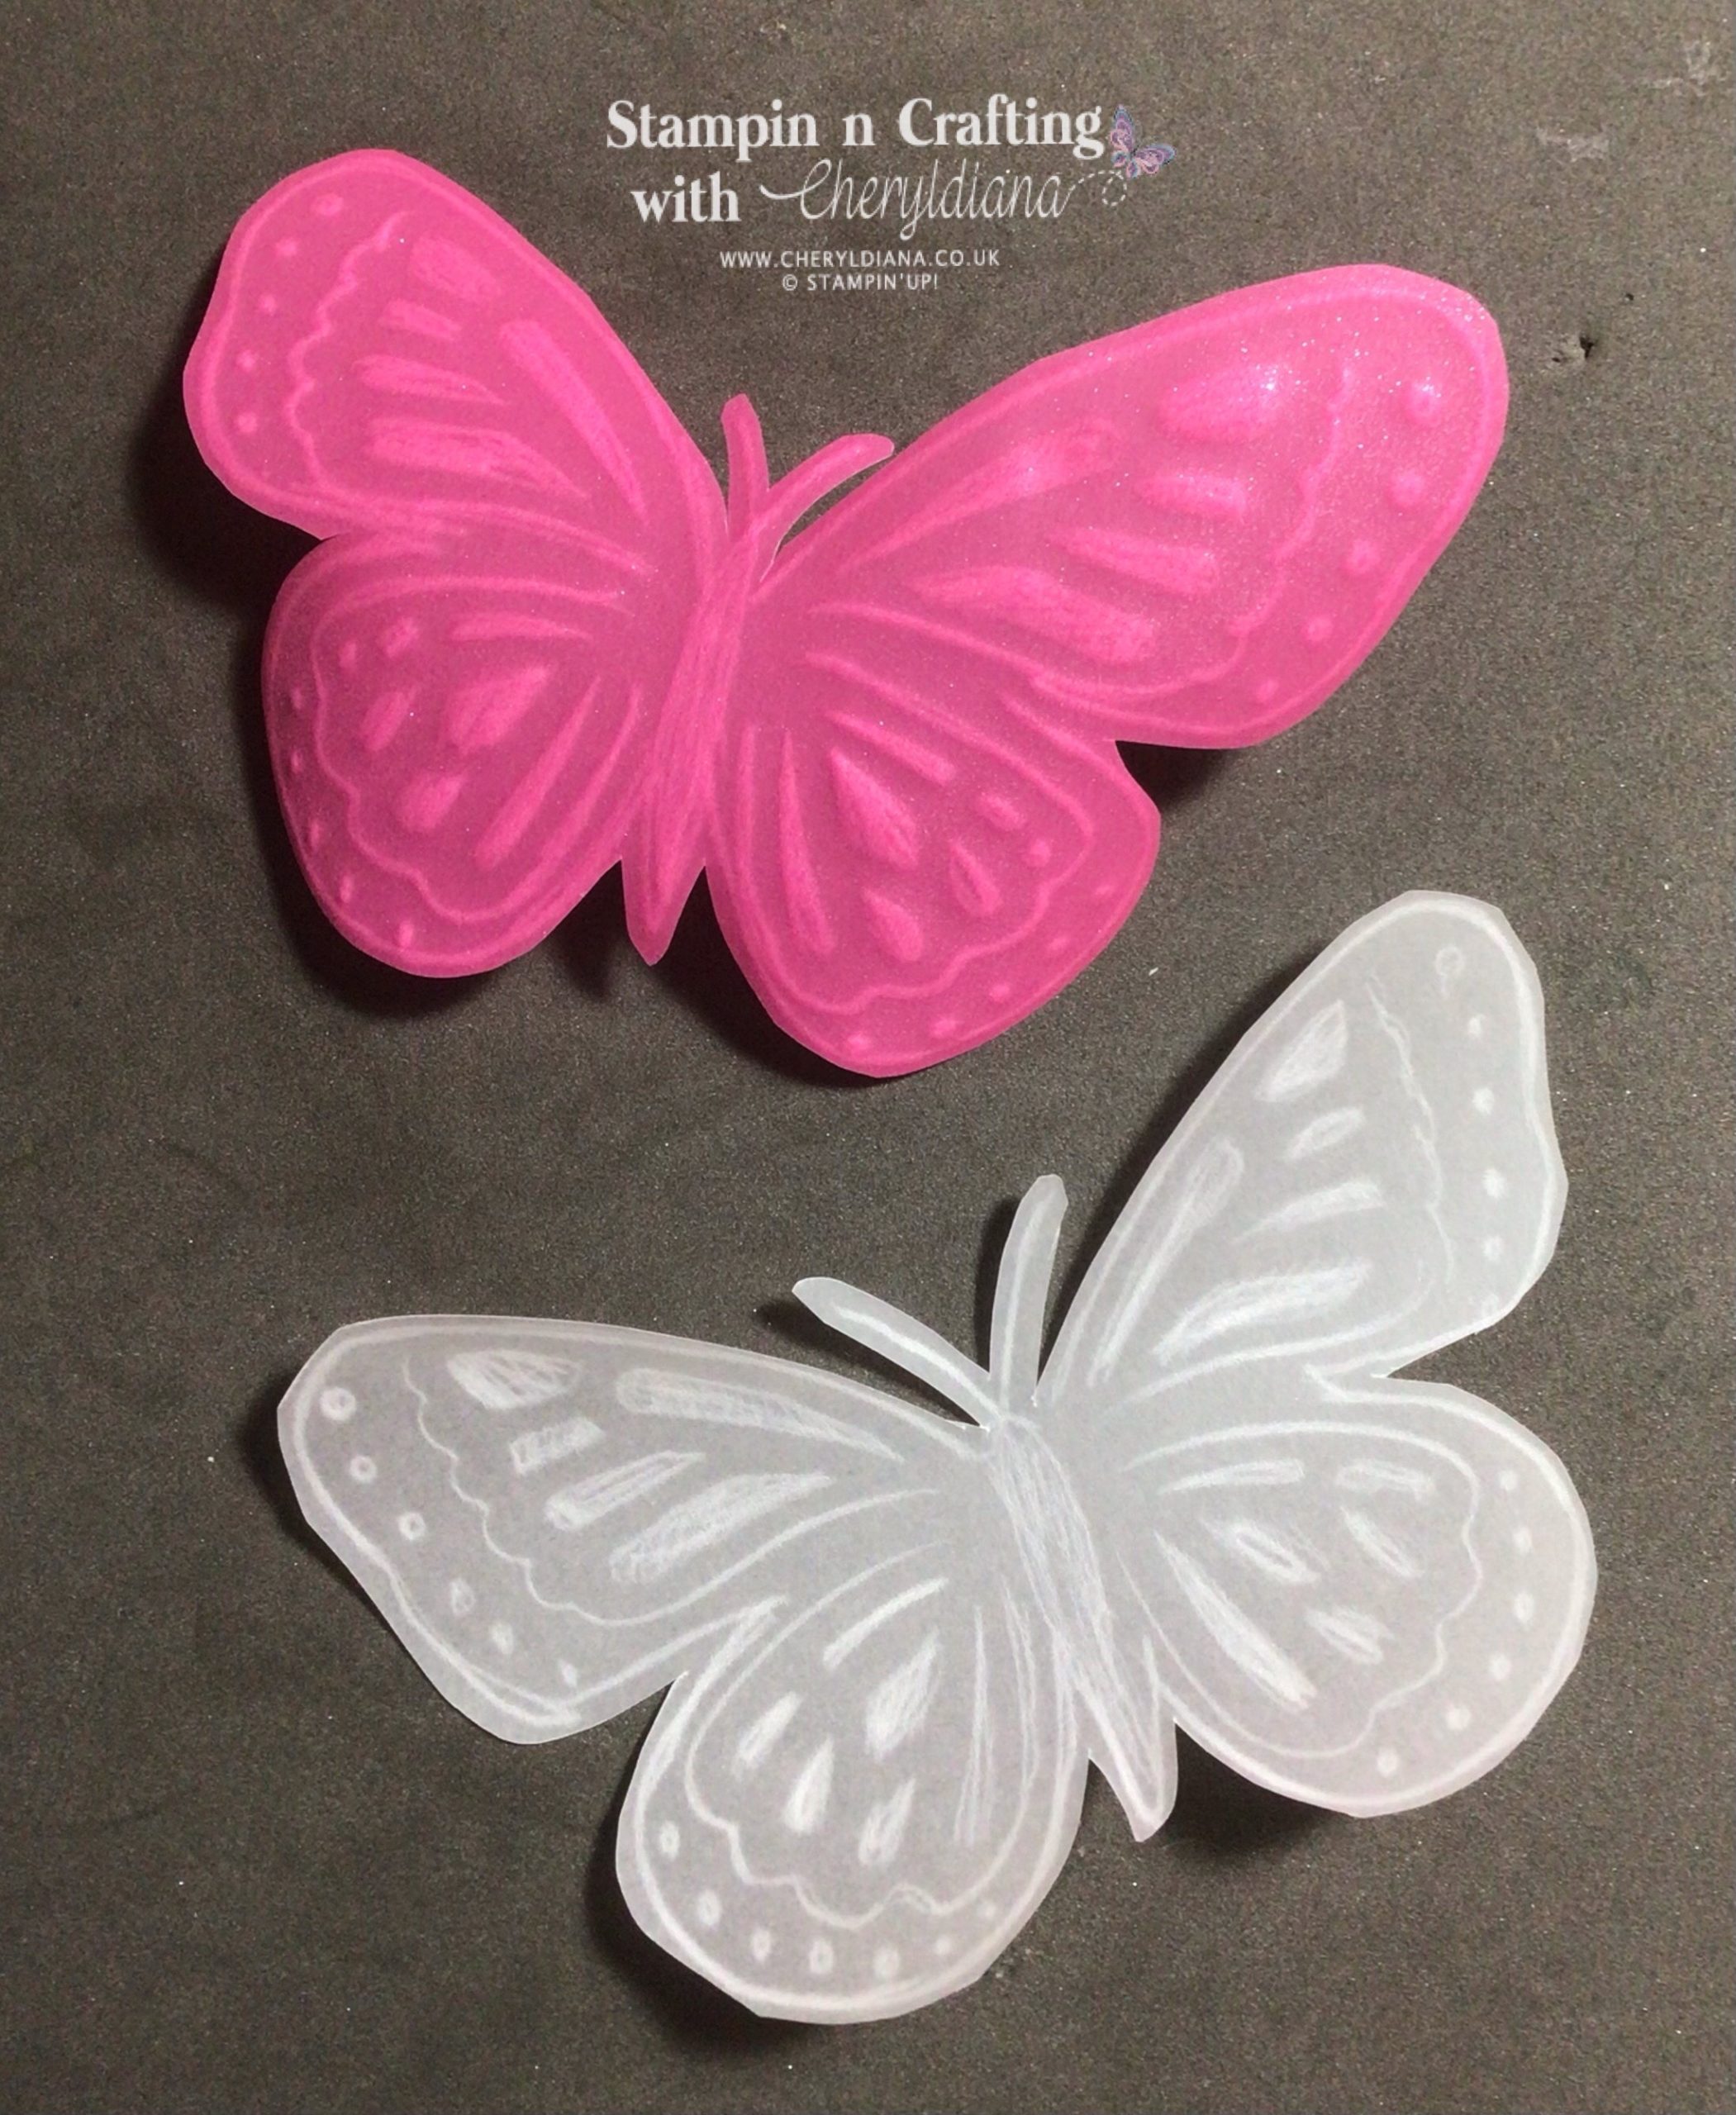 Photos showing you both sides of the finished vellum butterflies.